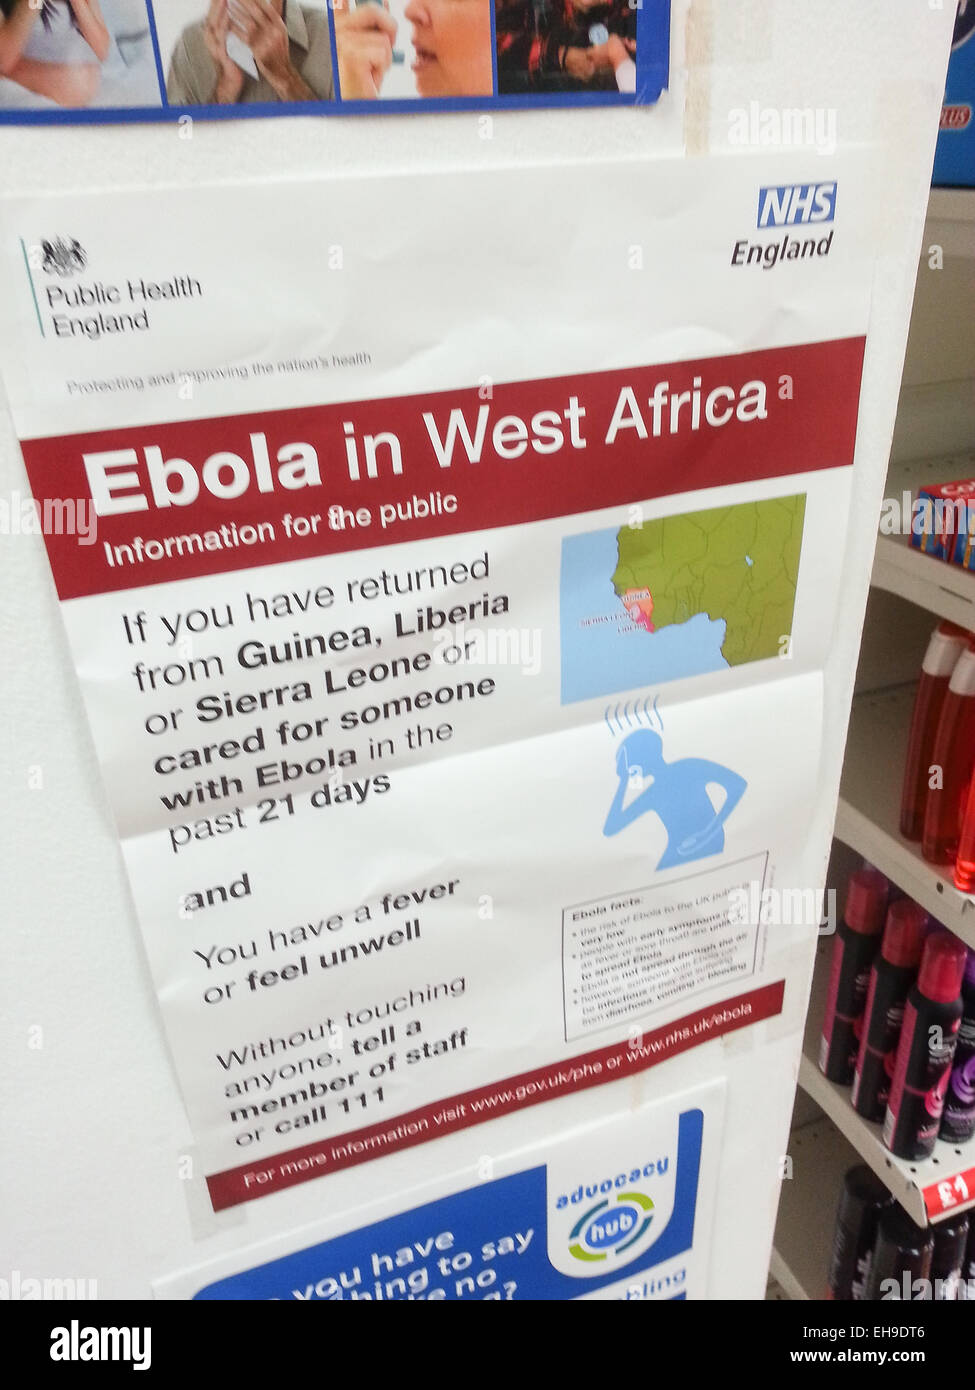 ebola in west africa NHS Health campaign Stock Photo